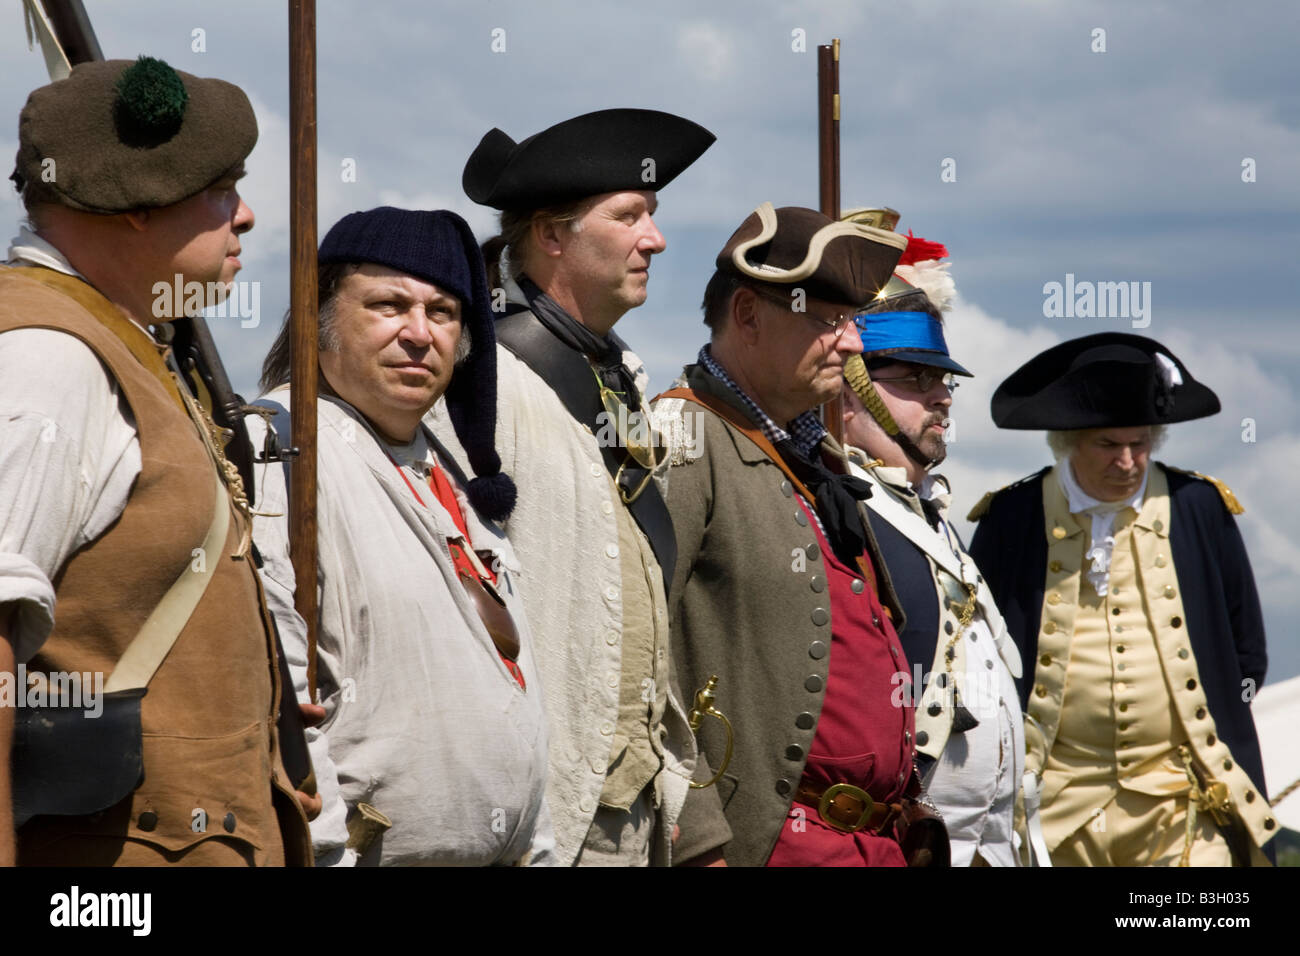 George Washington impersonator Dean Malissa inspecting troops at Revolutionary War reenactment Mohawk Valley New York State Stock Photo